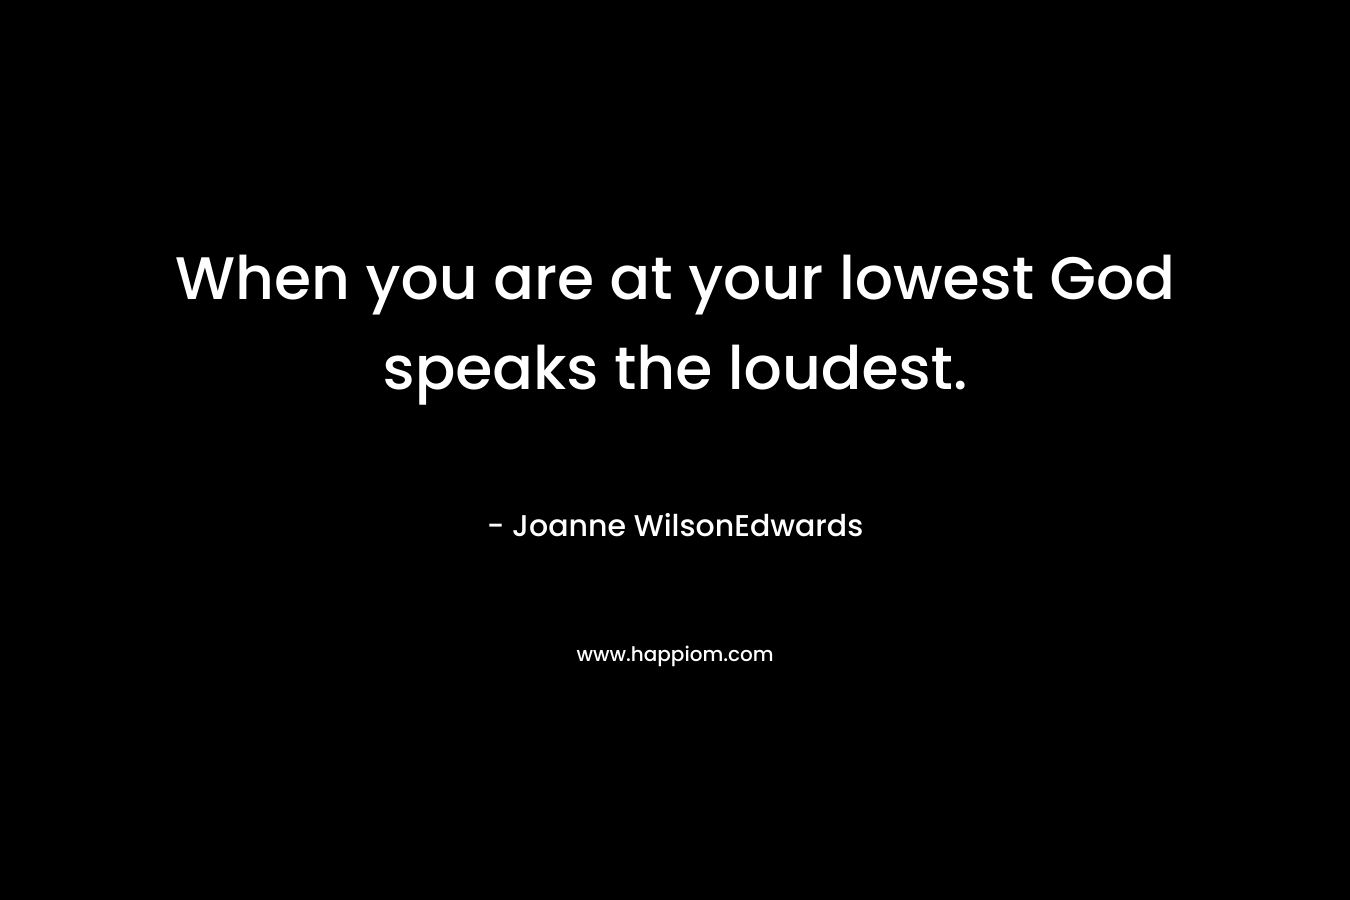 When you are at your lowest God speaks the loudest. – Joanne WilsonEdwards